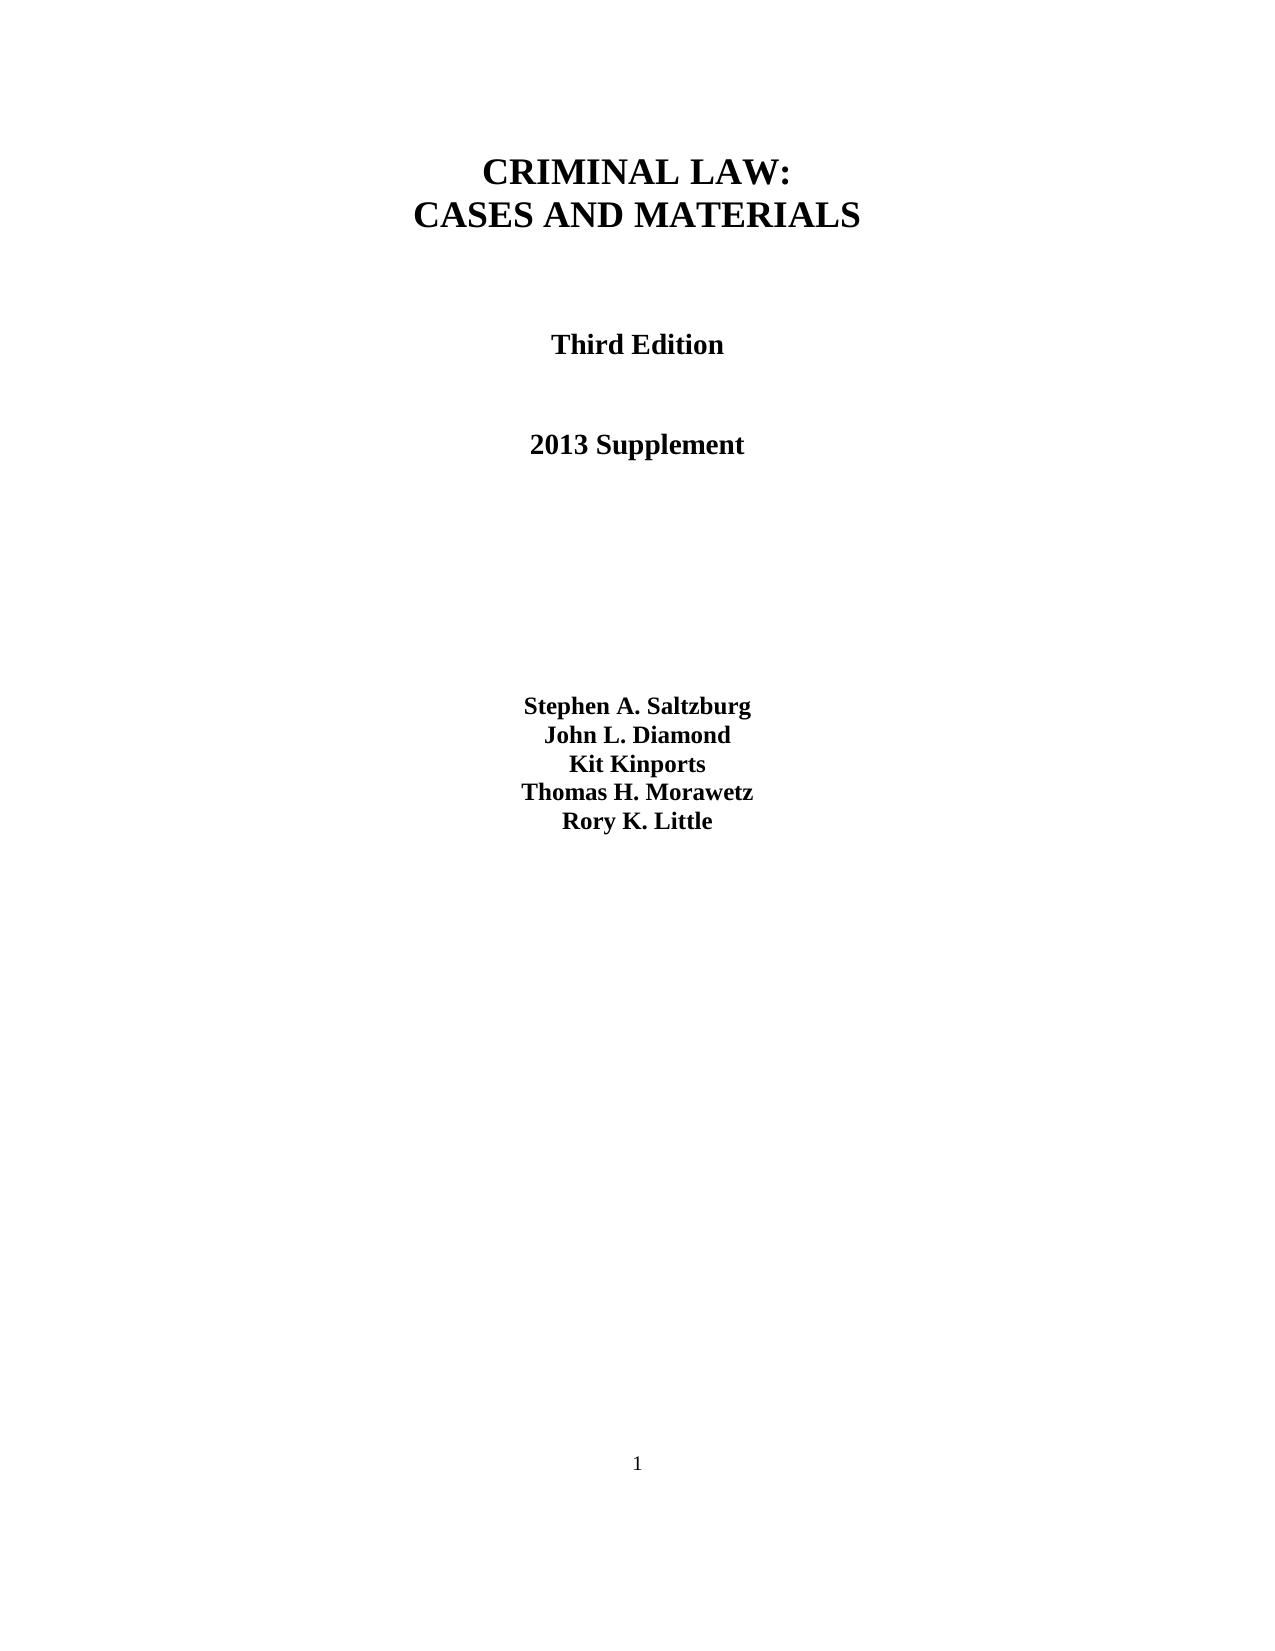 CRIMINAL LAW CASES AND MATERIALS 2013